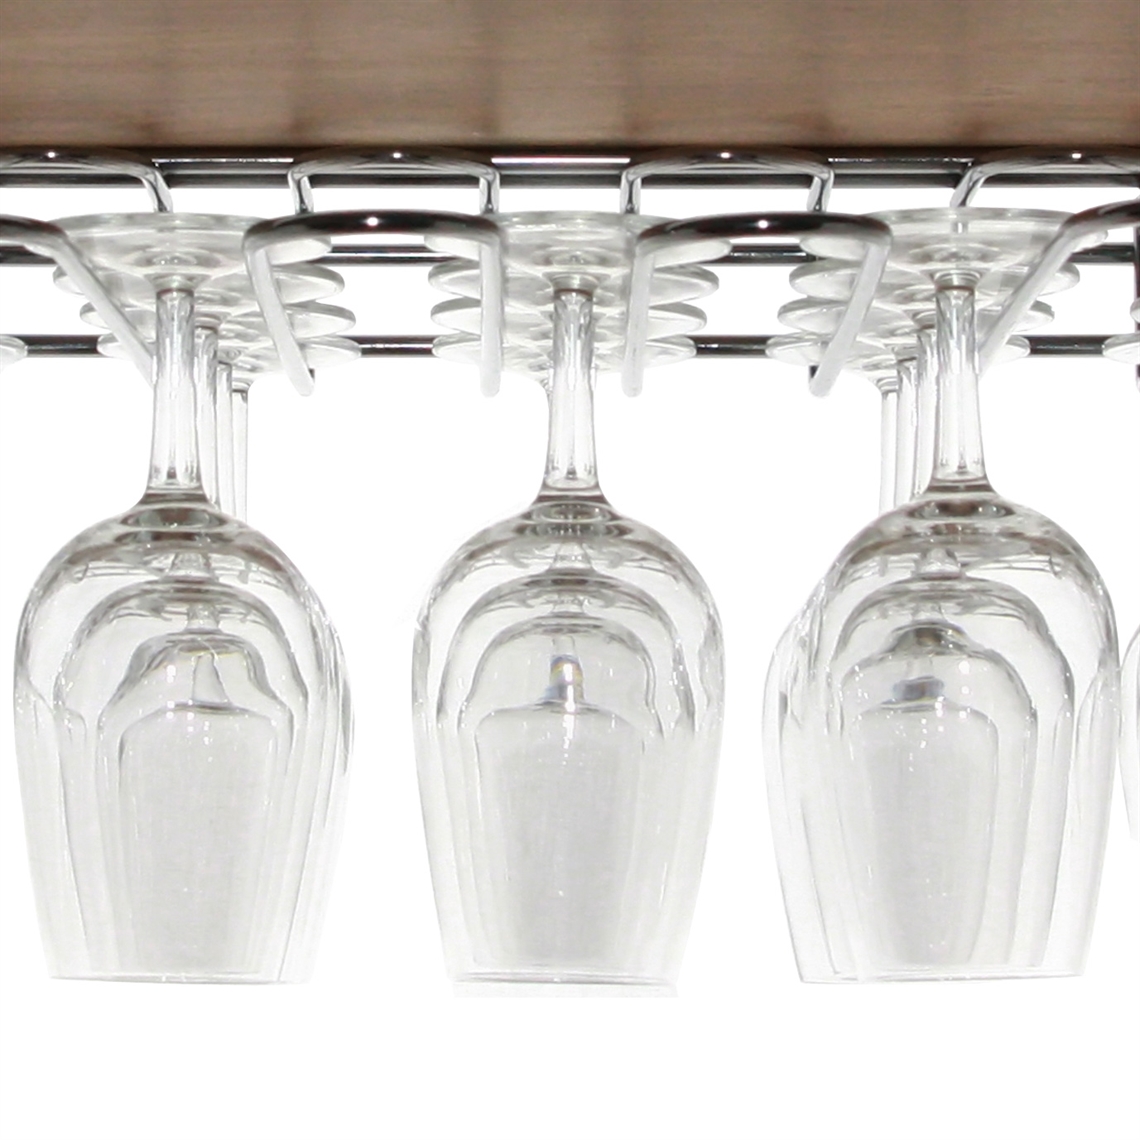 View more wine glass hanging racks from our Wine Glass Hanging Racks range